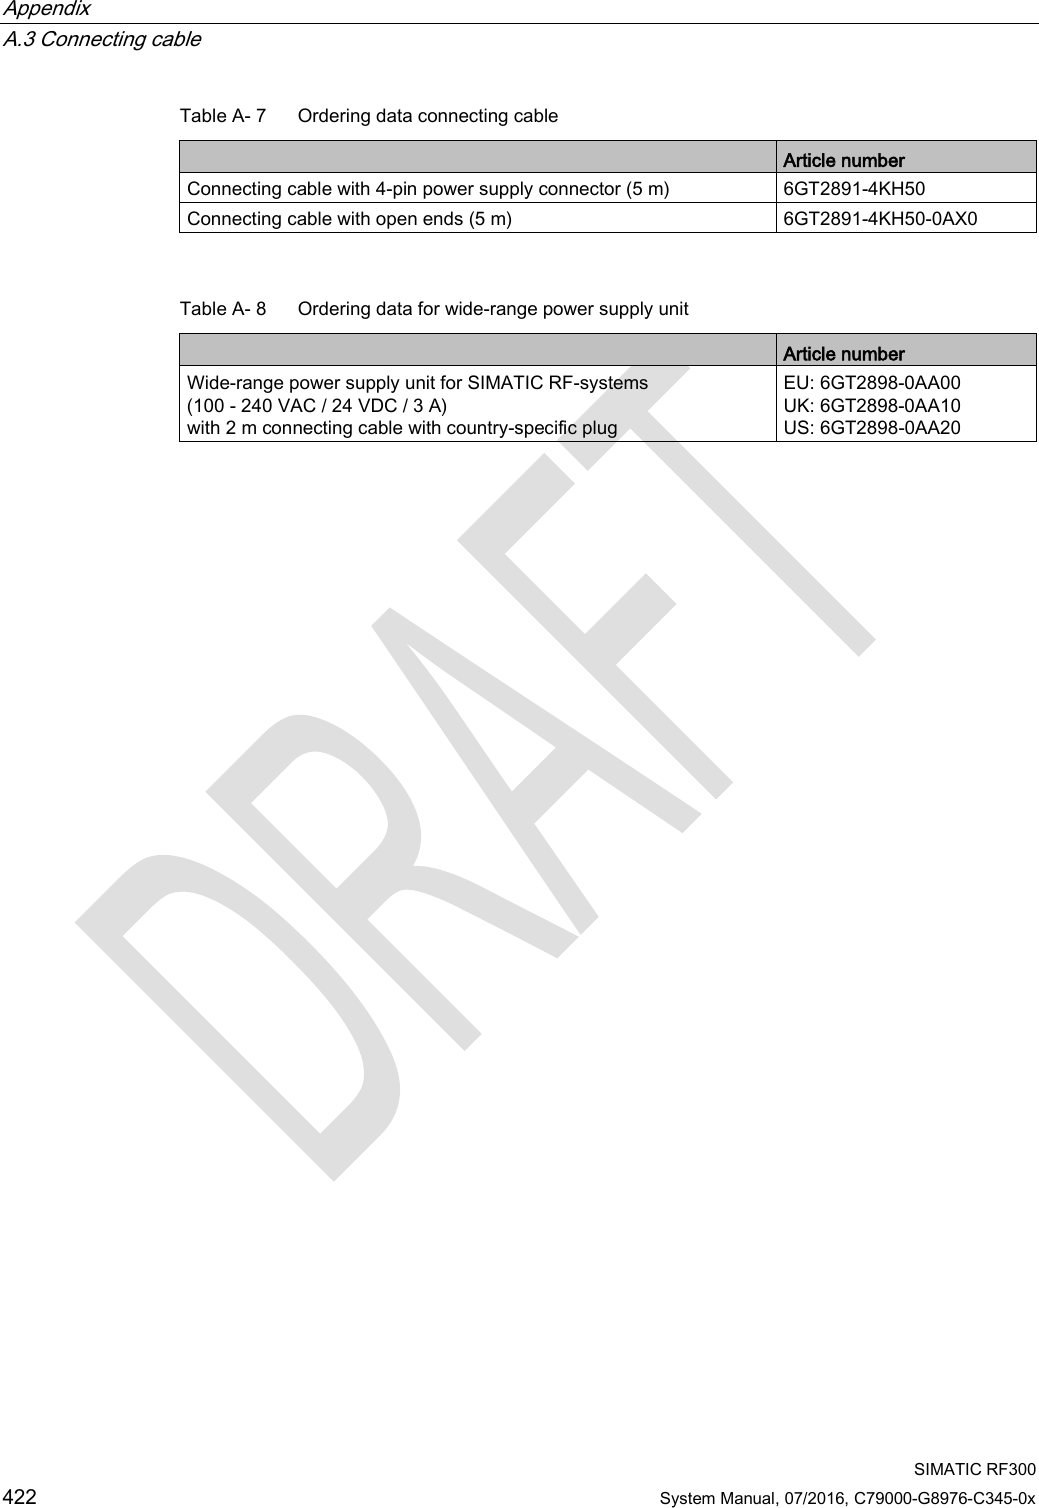 Appendix   A.3 Connecting cable  SIMATIC RF300 422 System Manual, 07/2016, C79000-G8976-C345-0x Table A- 7  Ordering data connecting cable  Article number Connecting cable with 4-pin power supply connector (5 m) 6GT2891-4KH50 Connecting cable with open ends (5 m) 6GT2891-4KH50-0AX0  Table A- 8  Ordering data for wide-range power supply unit  Article number Wide-range power supply unit for SIMATIC RF-systems  (100 - 240 VAC / 24 VDC / 3 A)  with 2 m connecting cable with country-specific plug EU: 6GT2898-0AA00 UK: 6GT2898-0AA10 US: 6GT2898-0AA20 